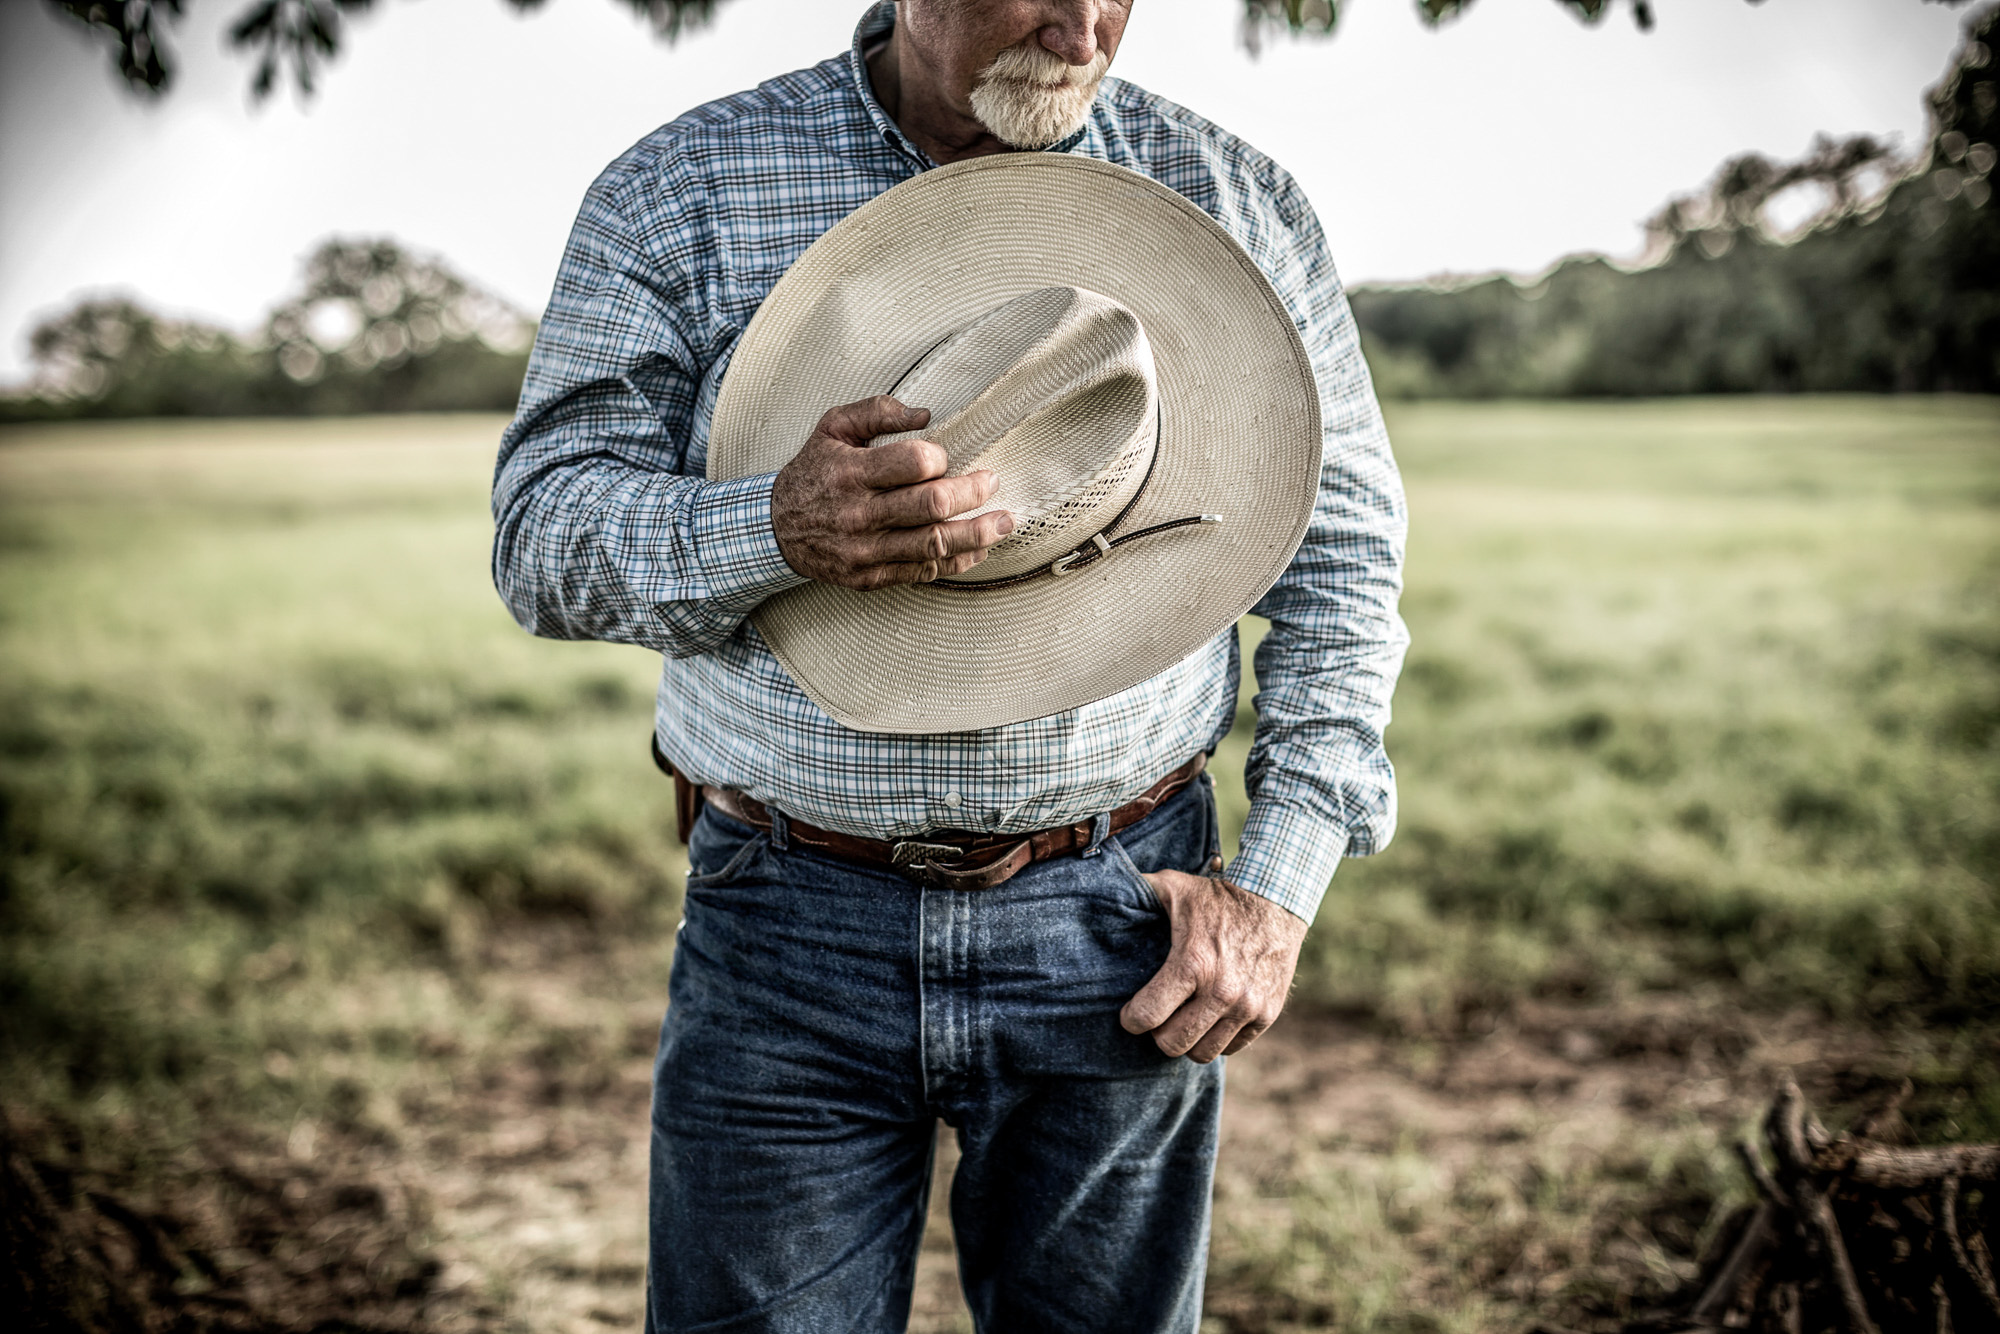 farmer rancher cowboy with cowboy hat over heart looking down